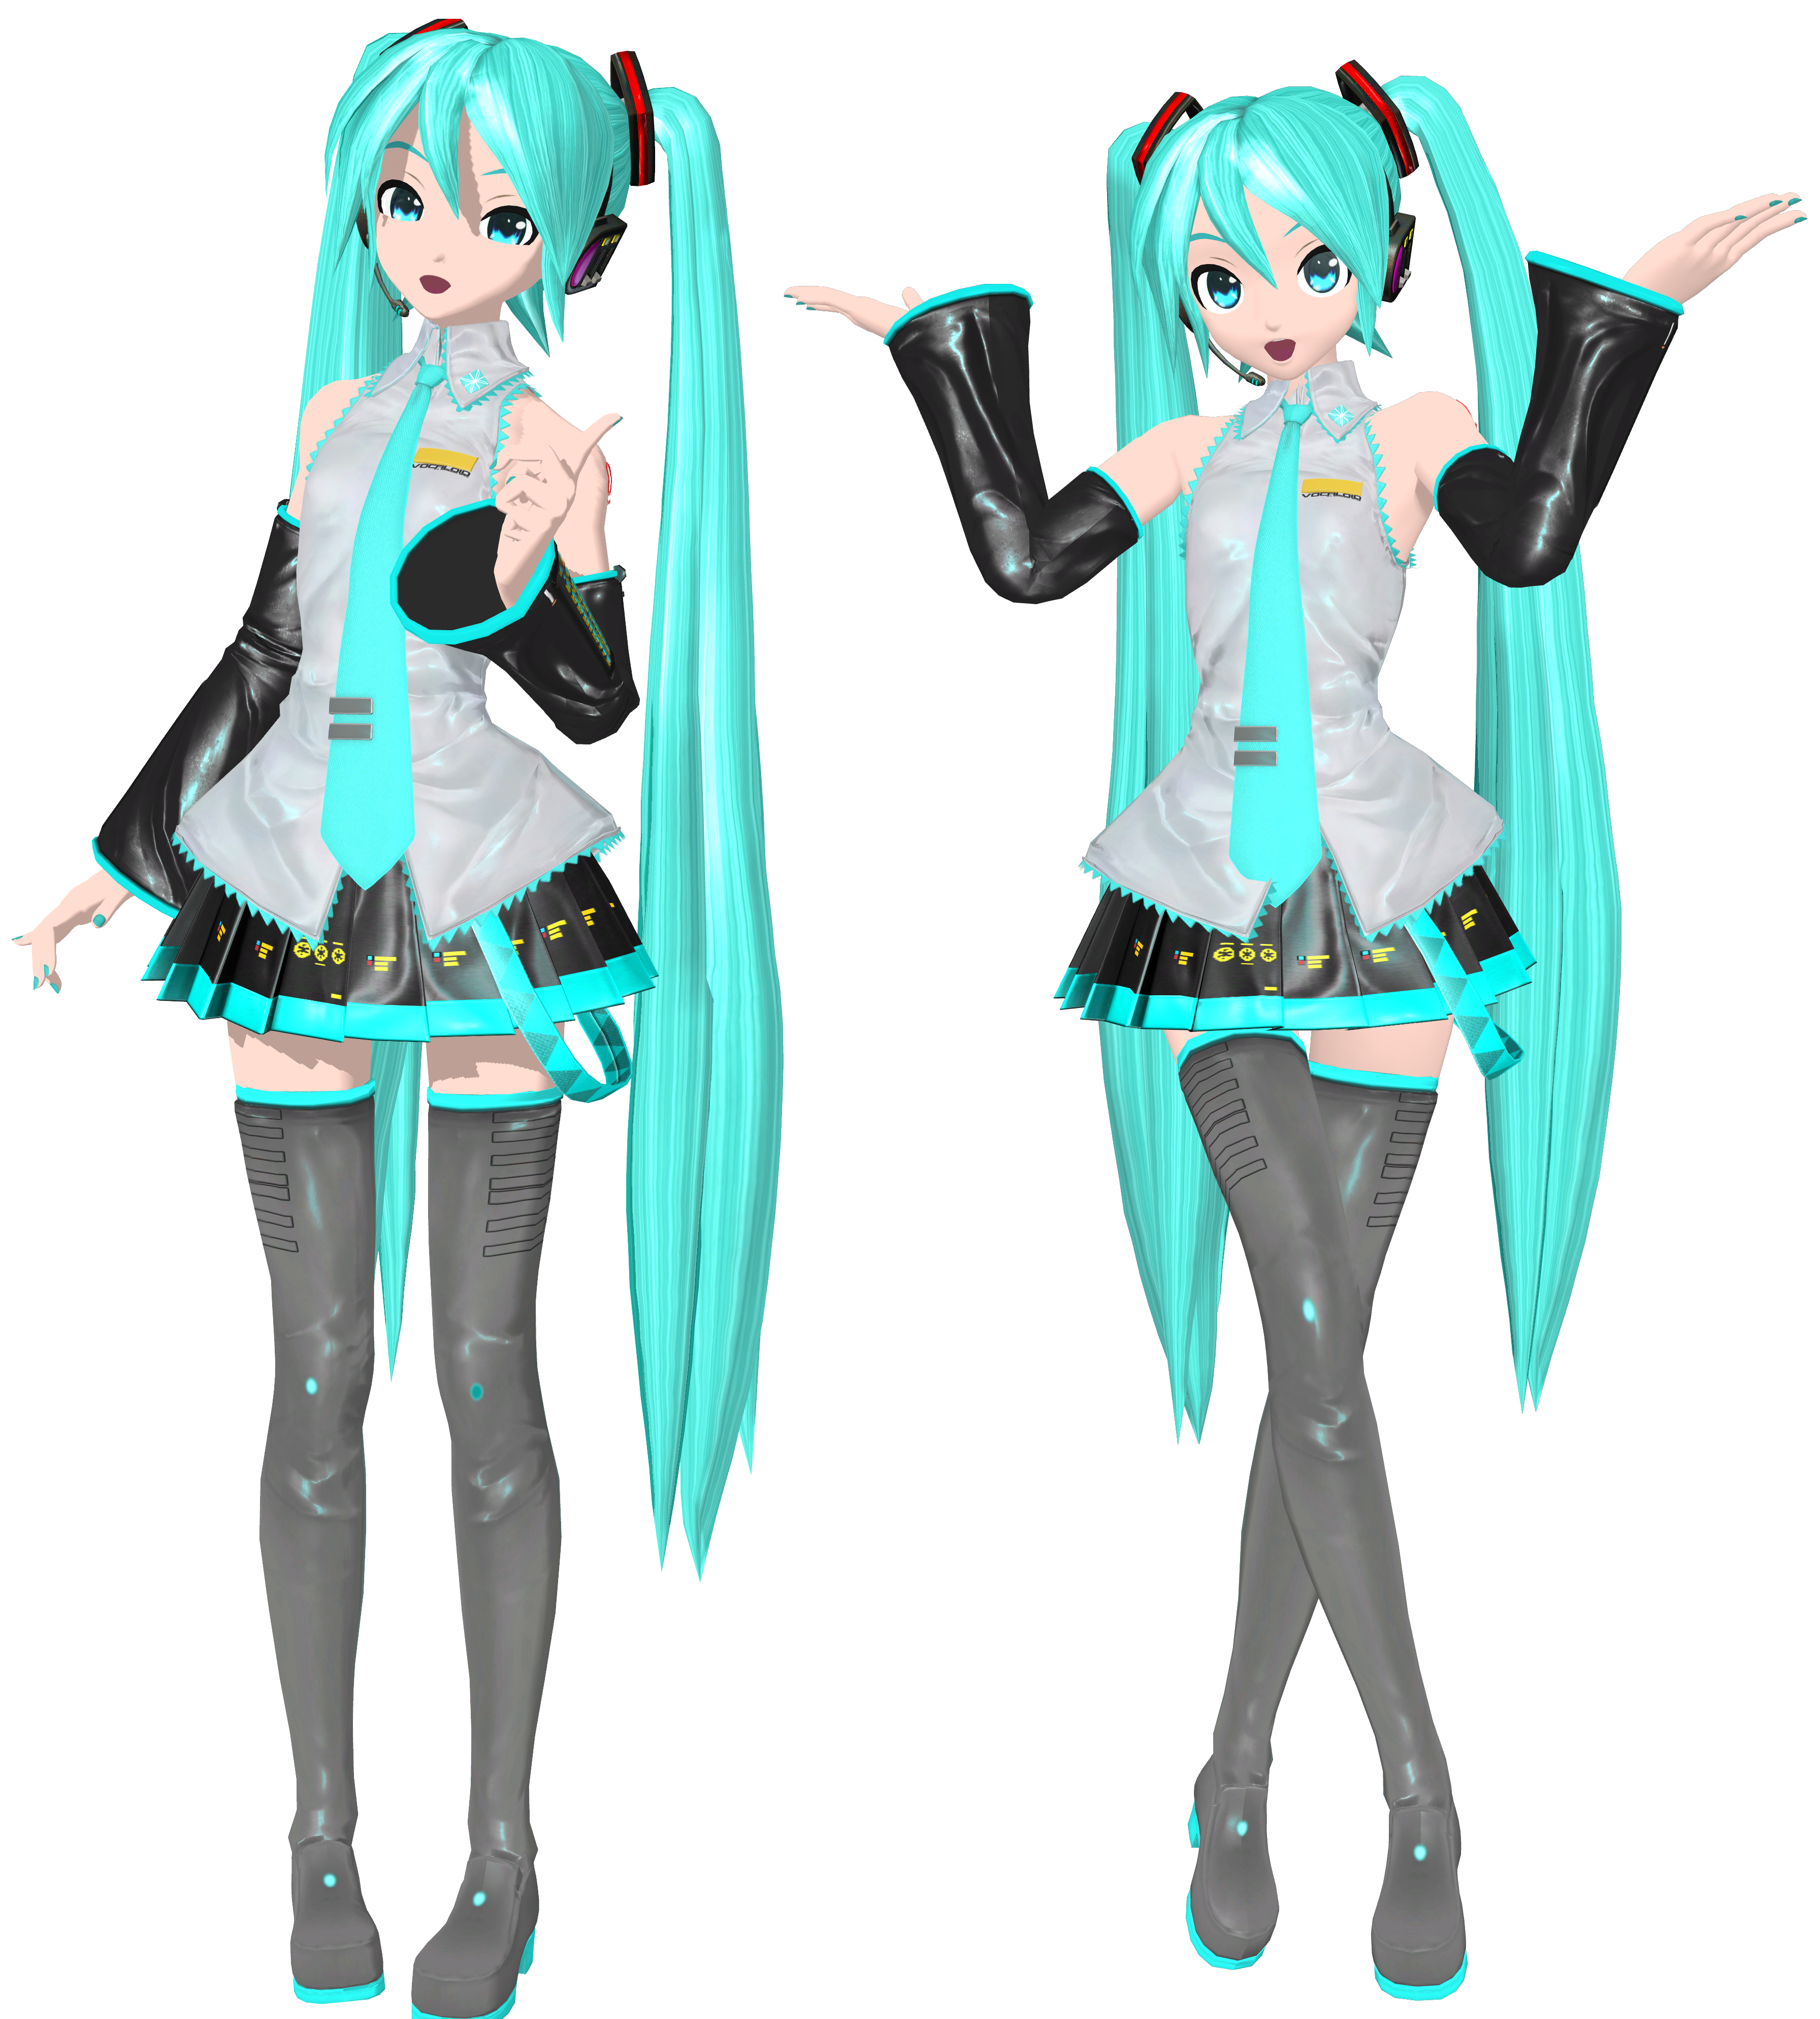 MMD PDAFT default shader and normal map.